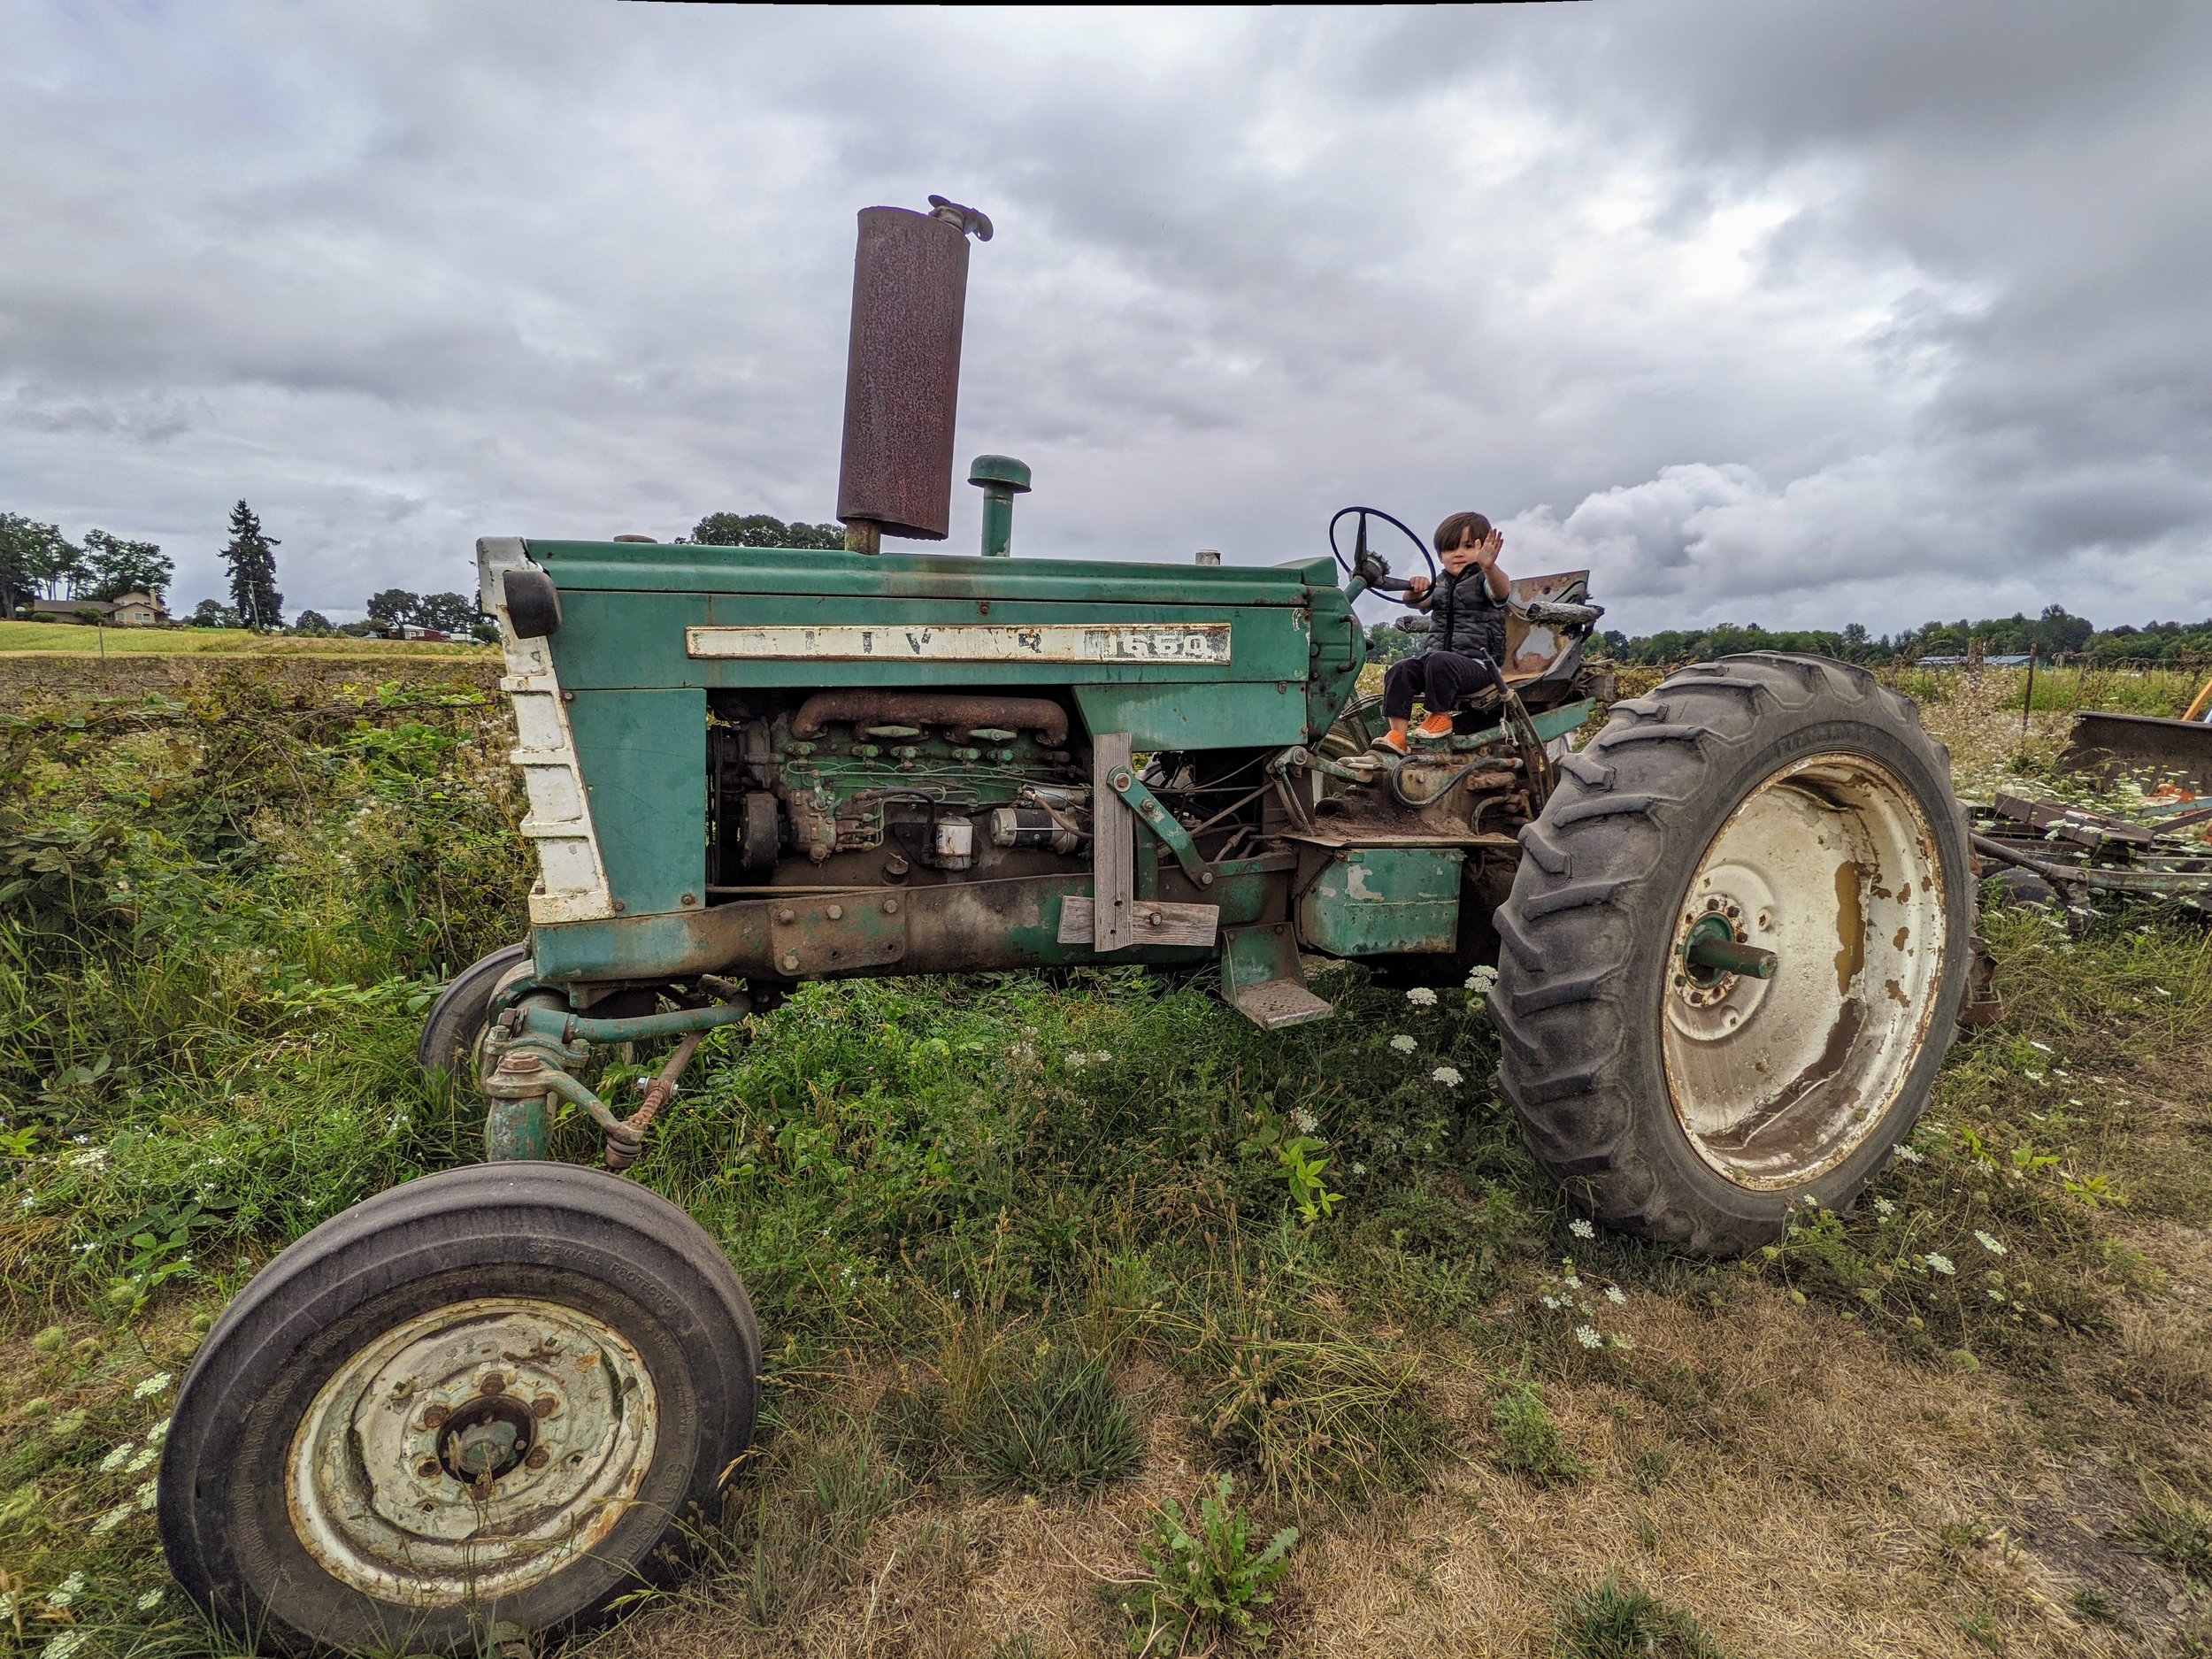  We broke down this year and changed our rule that kids couldn’t climb on the tractors. Even though they might look like relics, they are working tractors, and they have many sharp parts. But the joy of watching how happy the littles are to drive a t